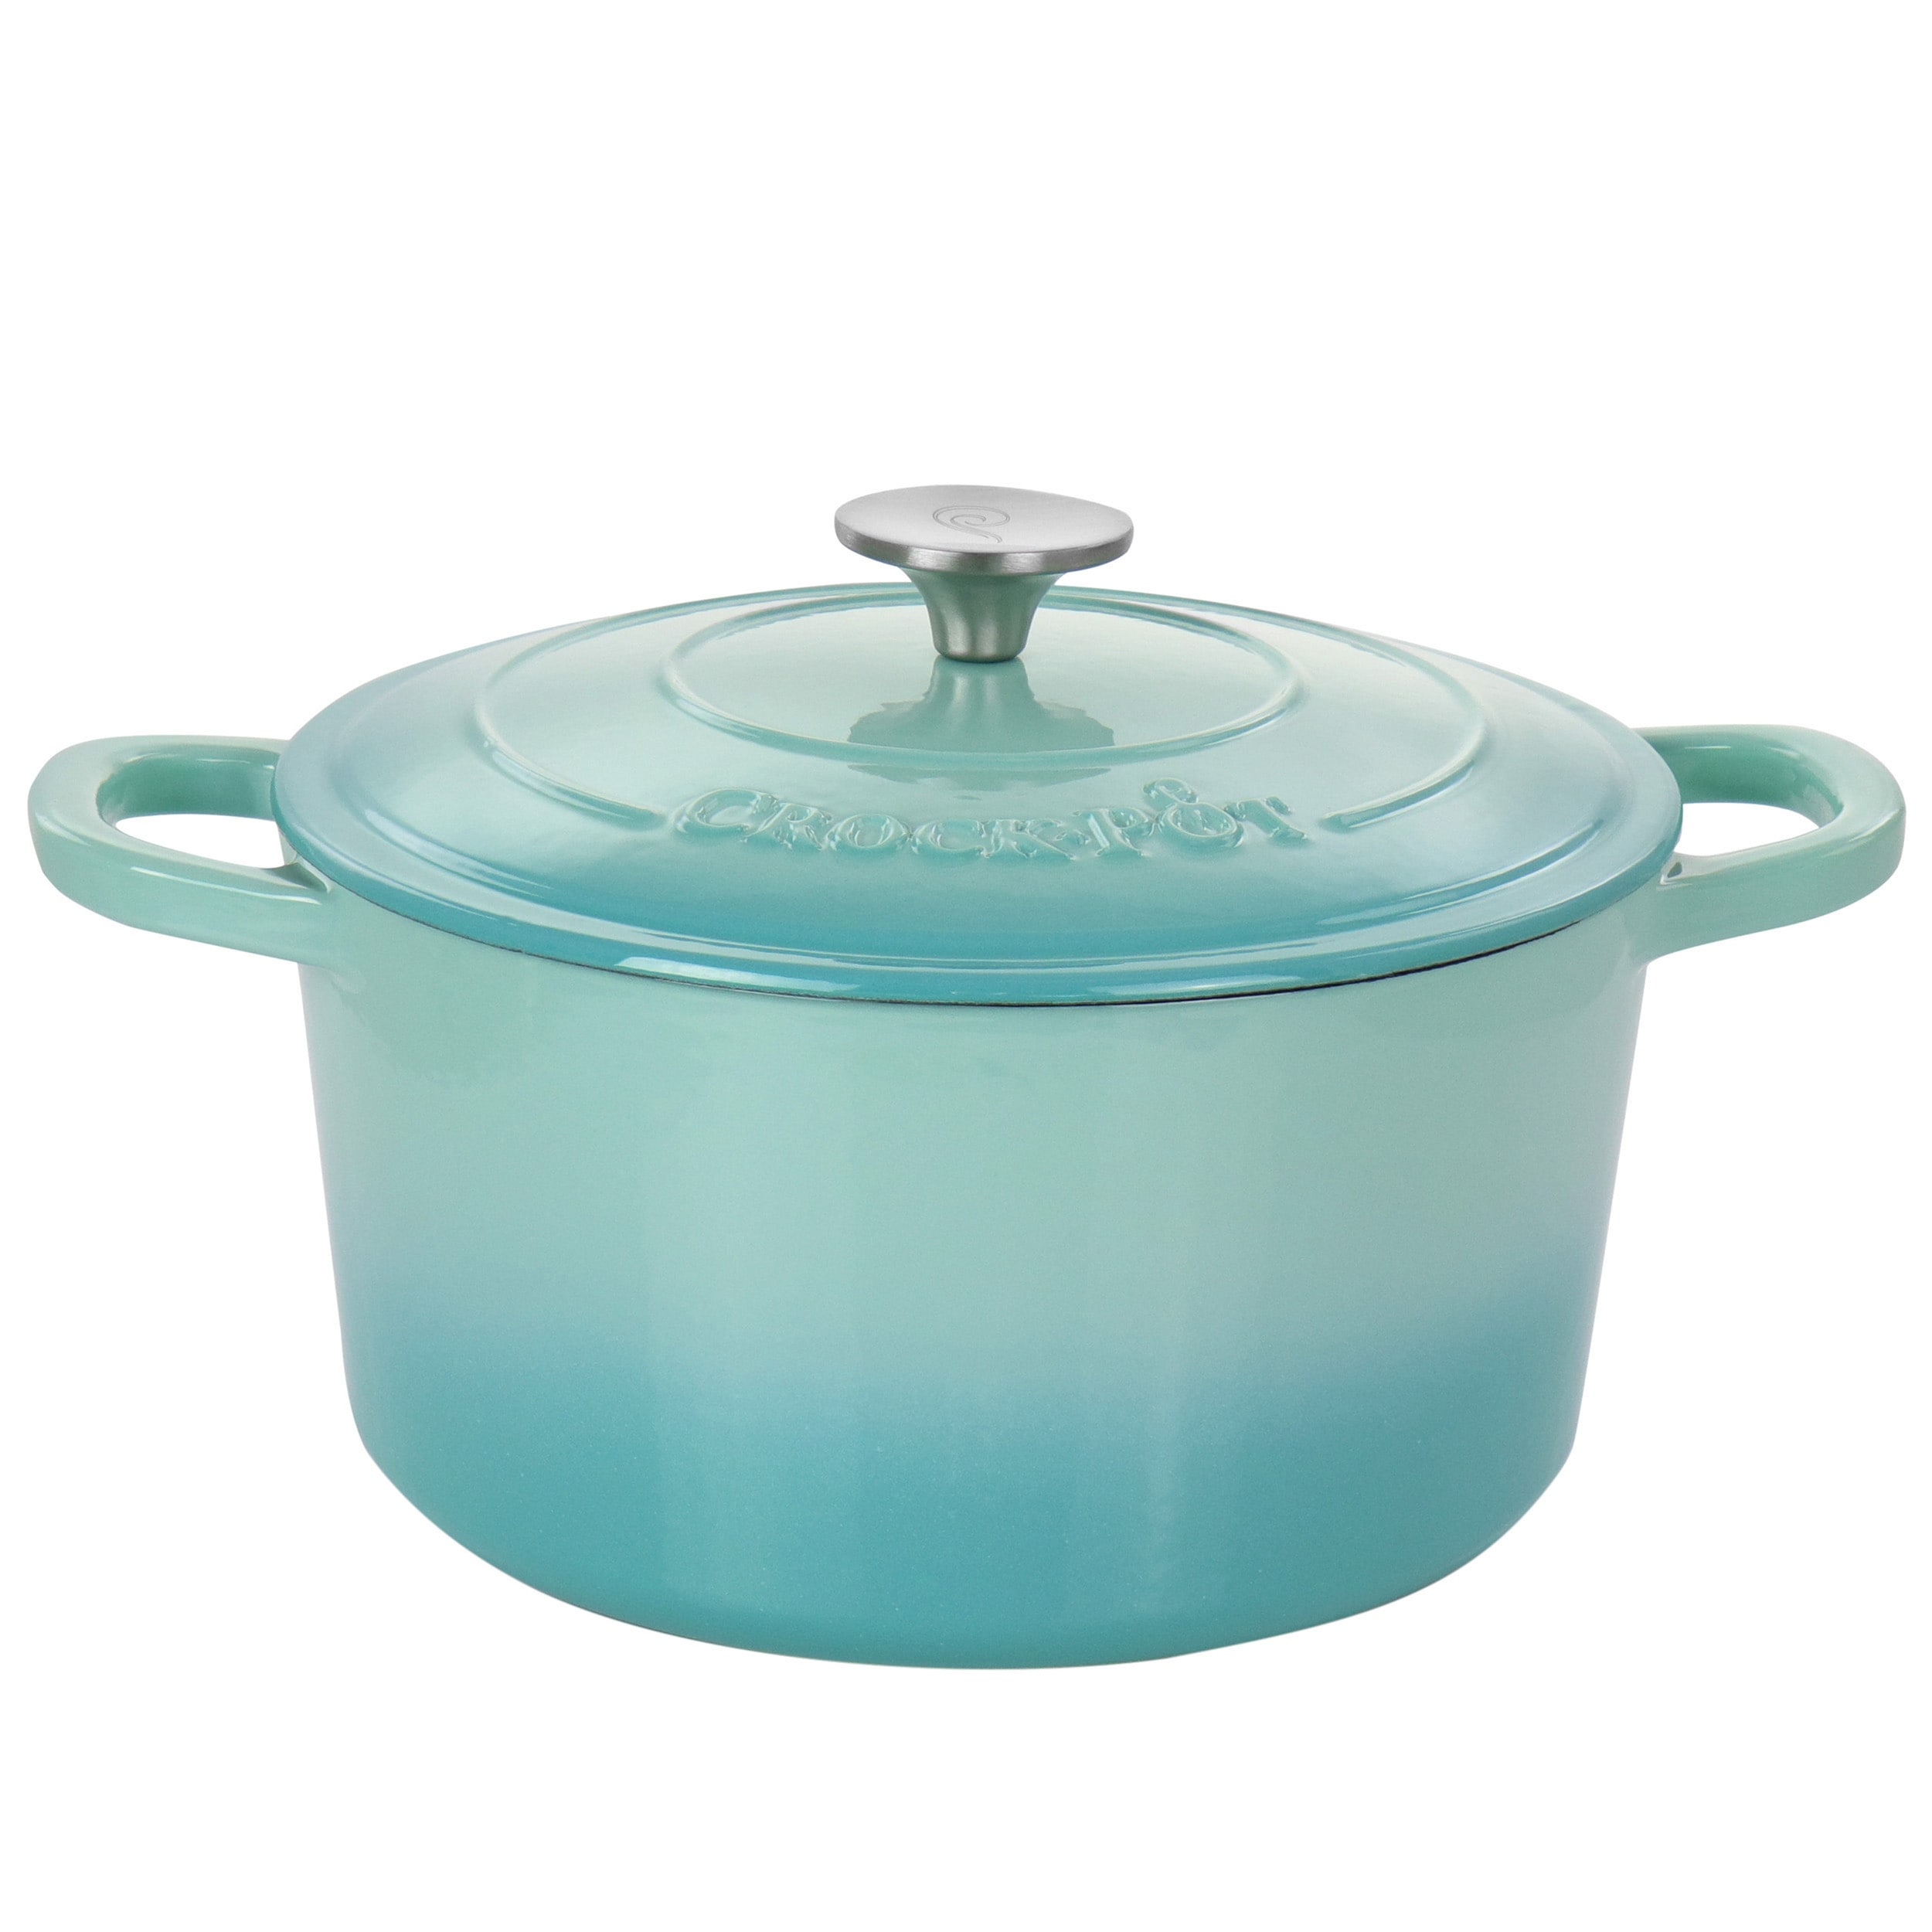 https://ak1.ostkcdn.com/images/products/is/images/direct/dba8571fe52202d86fabcd03ab978c4d66e114b1/5-Quarts-Enameled-Cast-Iron-Dutch-Oven-in-Light-Teal.jpg